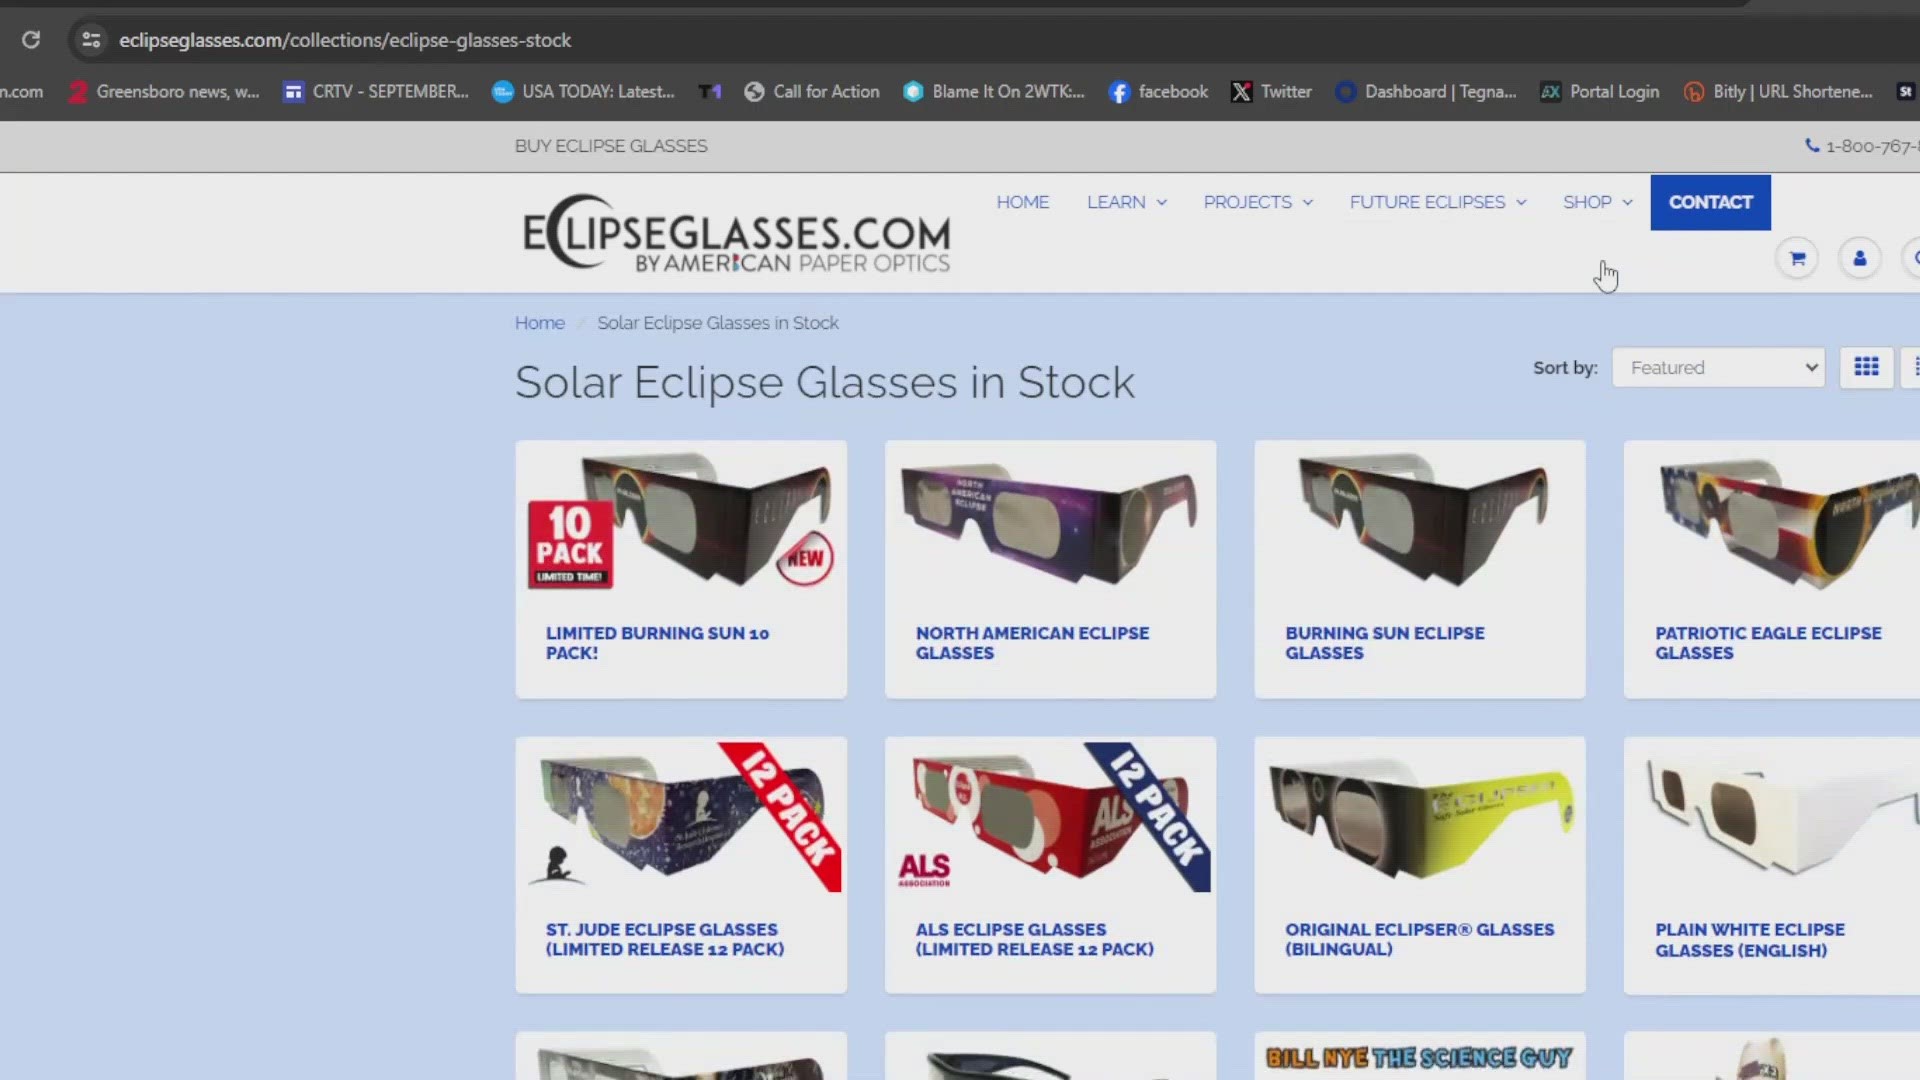 Like everything else, not all eclipse glasses are created equal. You don't want to damage your eyes, so look at the included list of merchants.